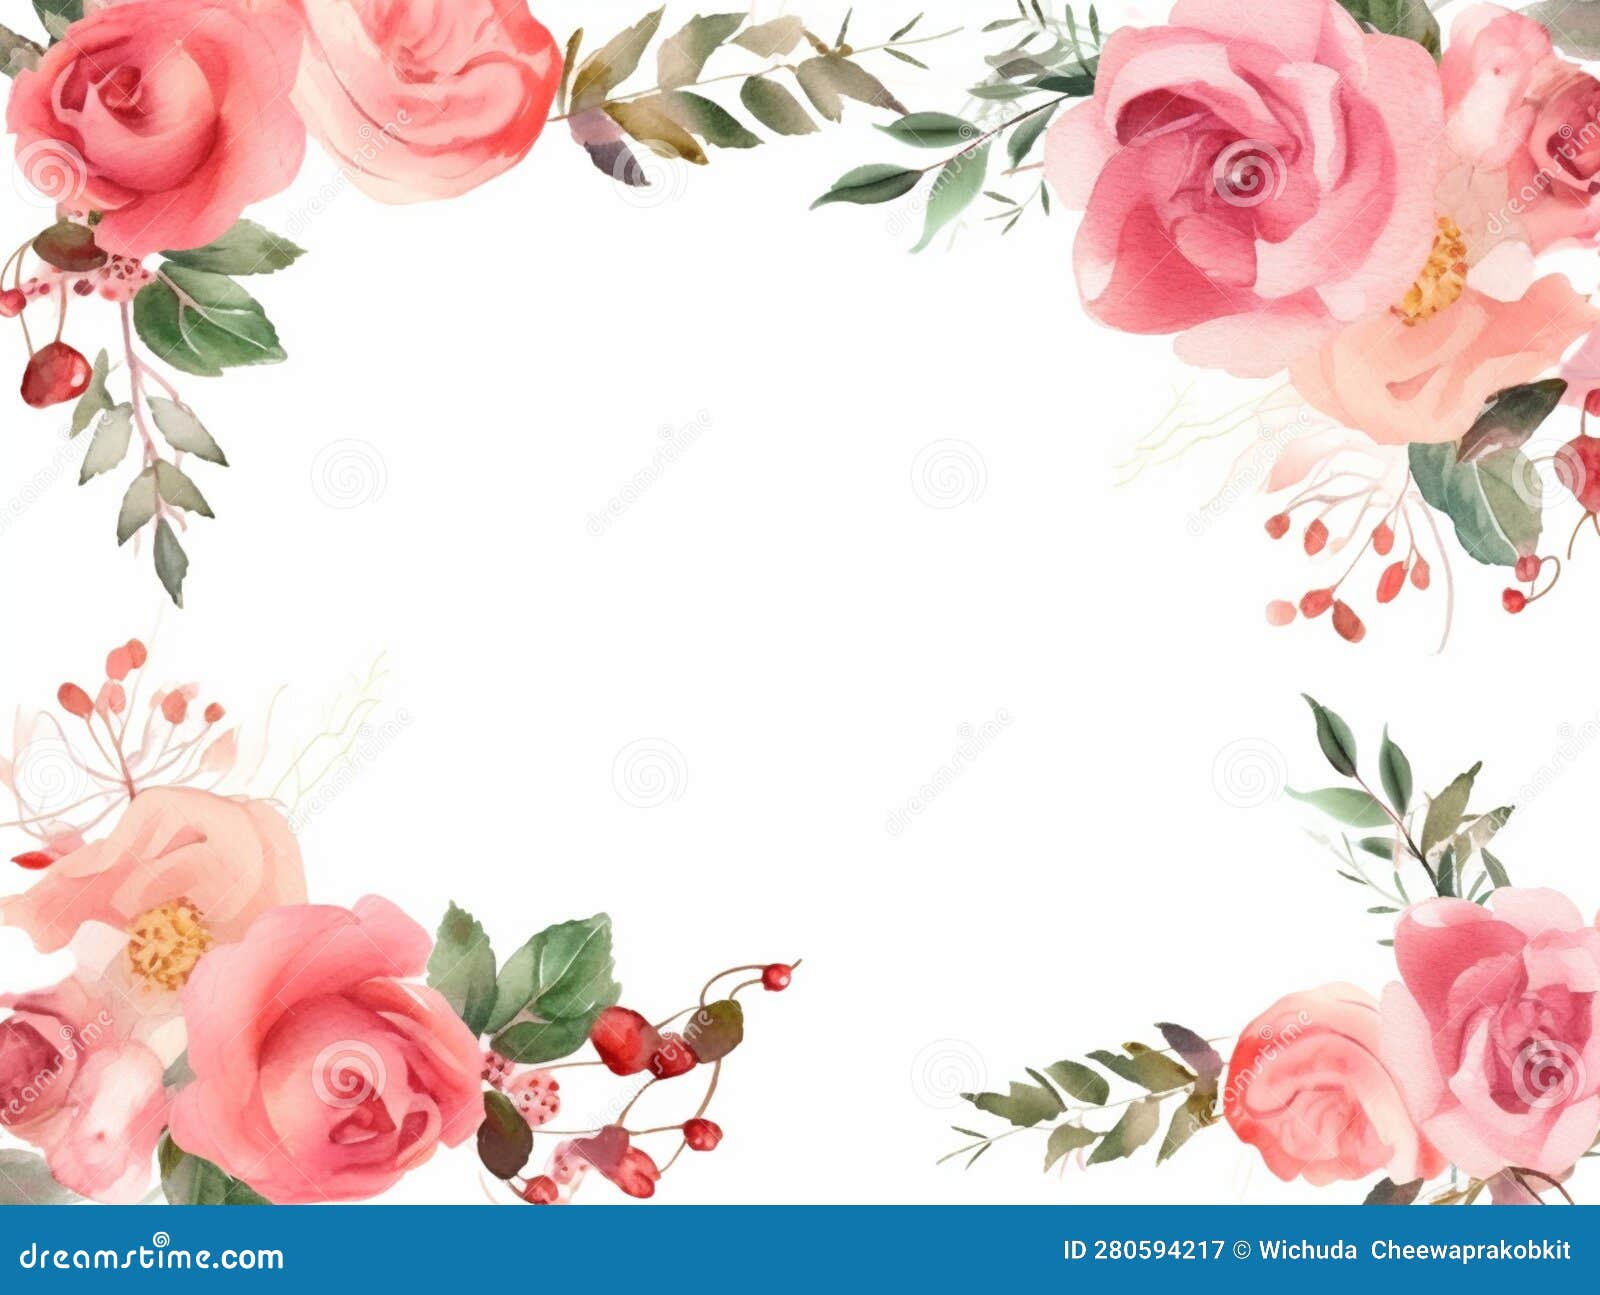 Colorful Border with Flowers. Stock Illustration - Illustration of ...